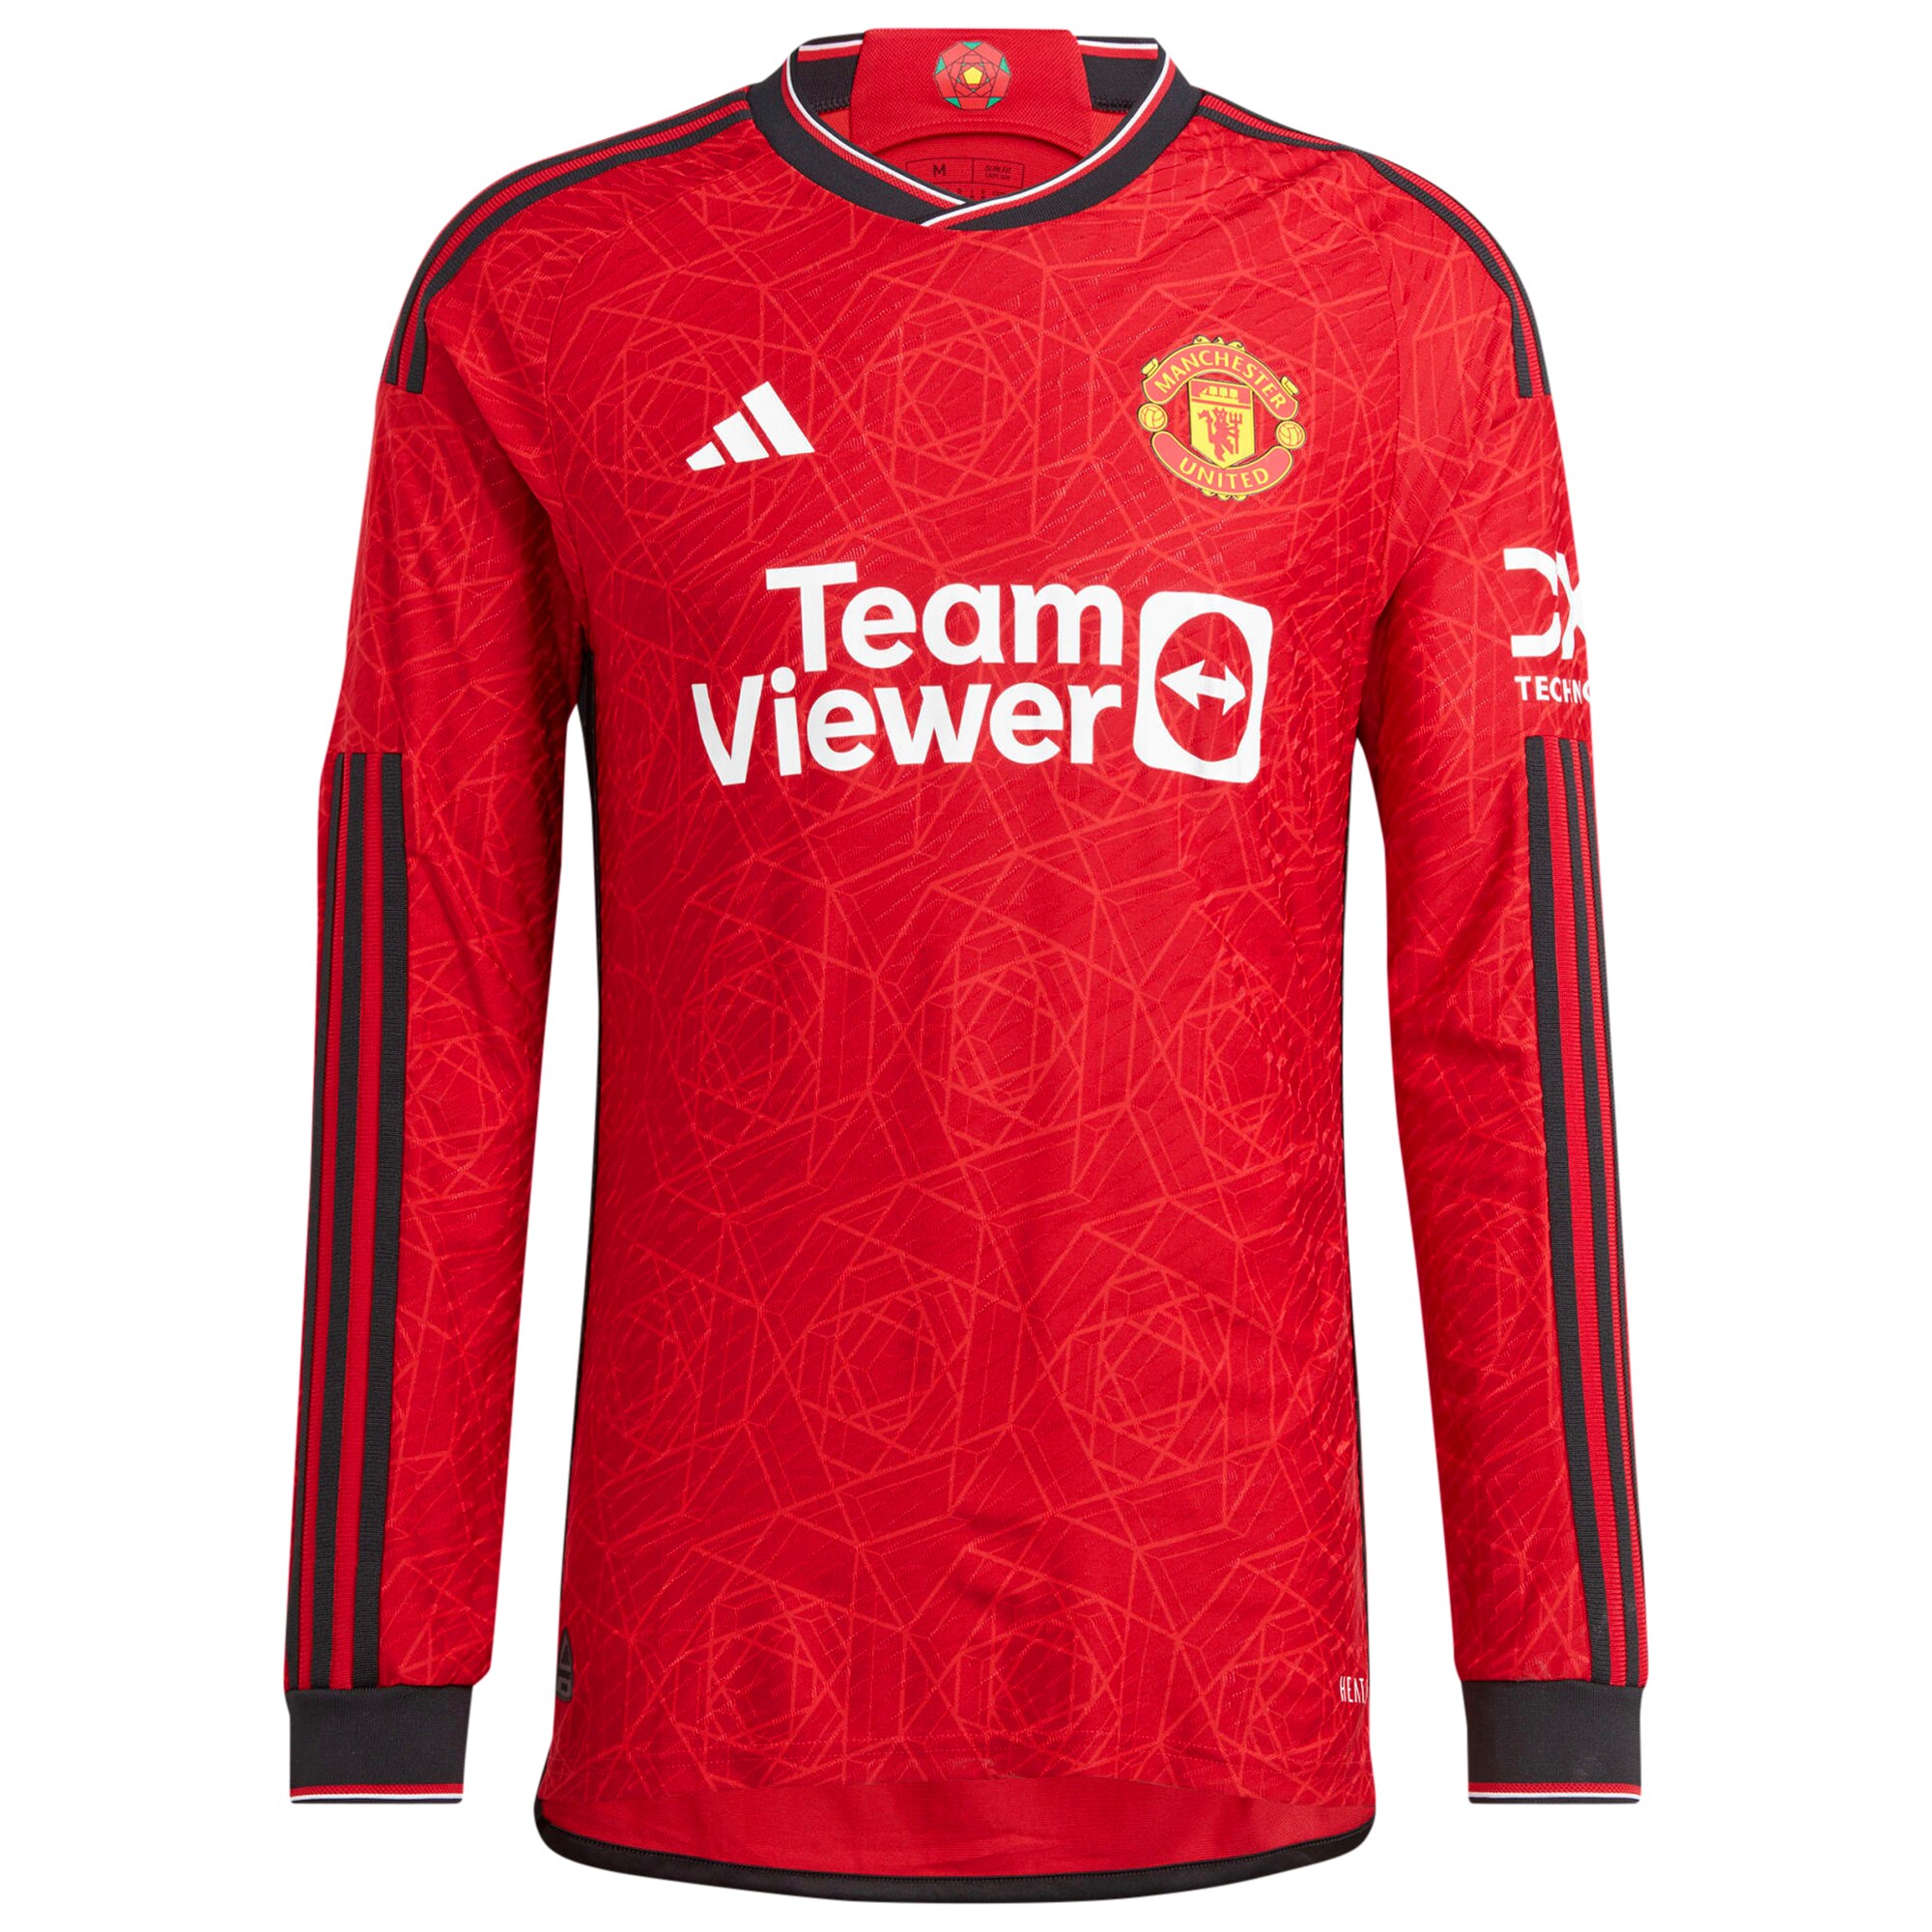 Manchester United Cup Home Authentic Shirt 2023-24 Long Sleeve with Mount 7 printing